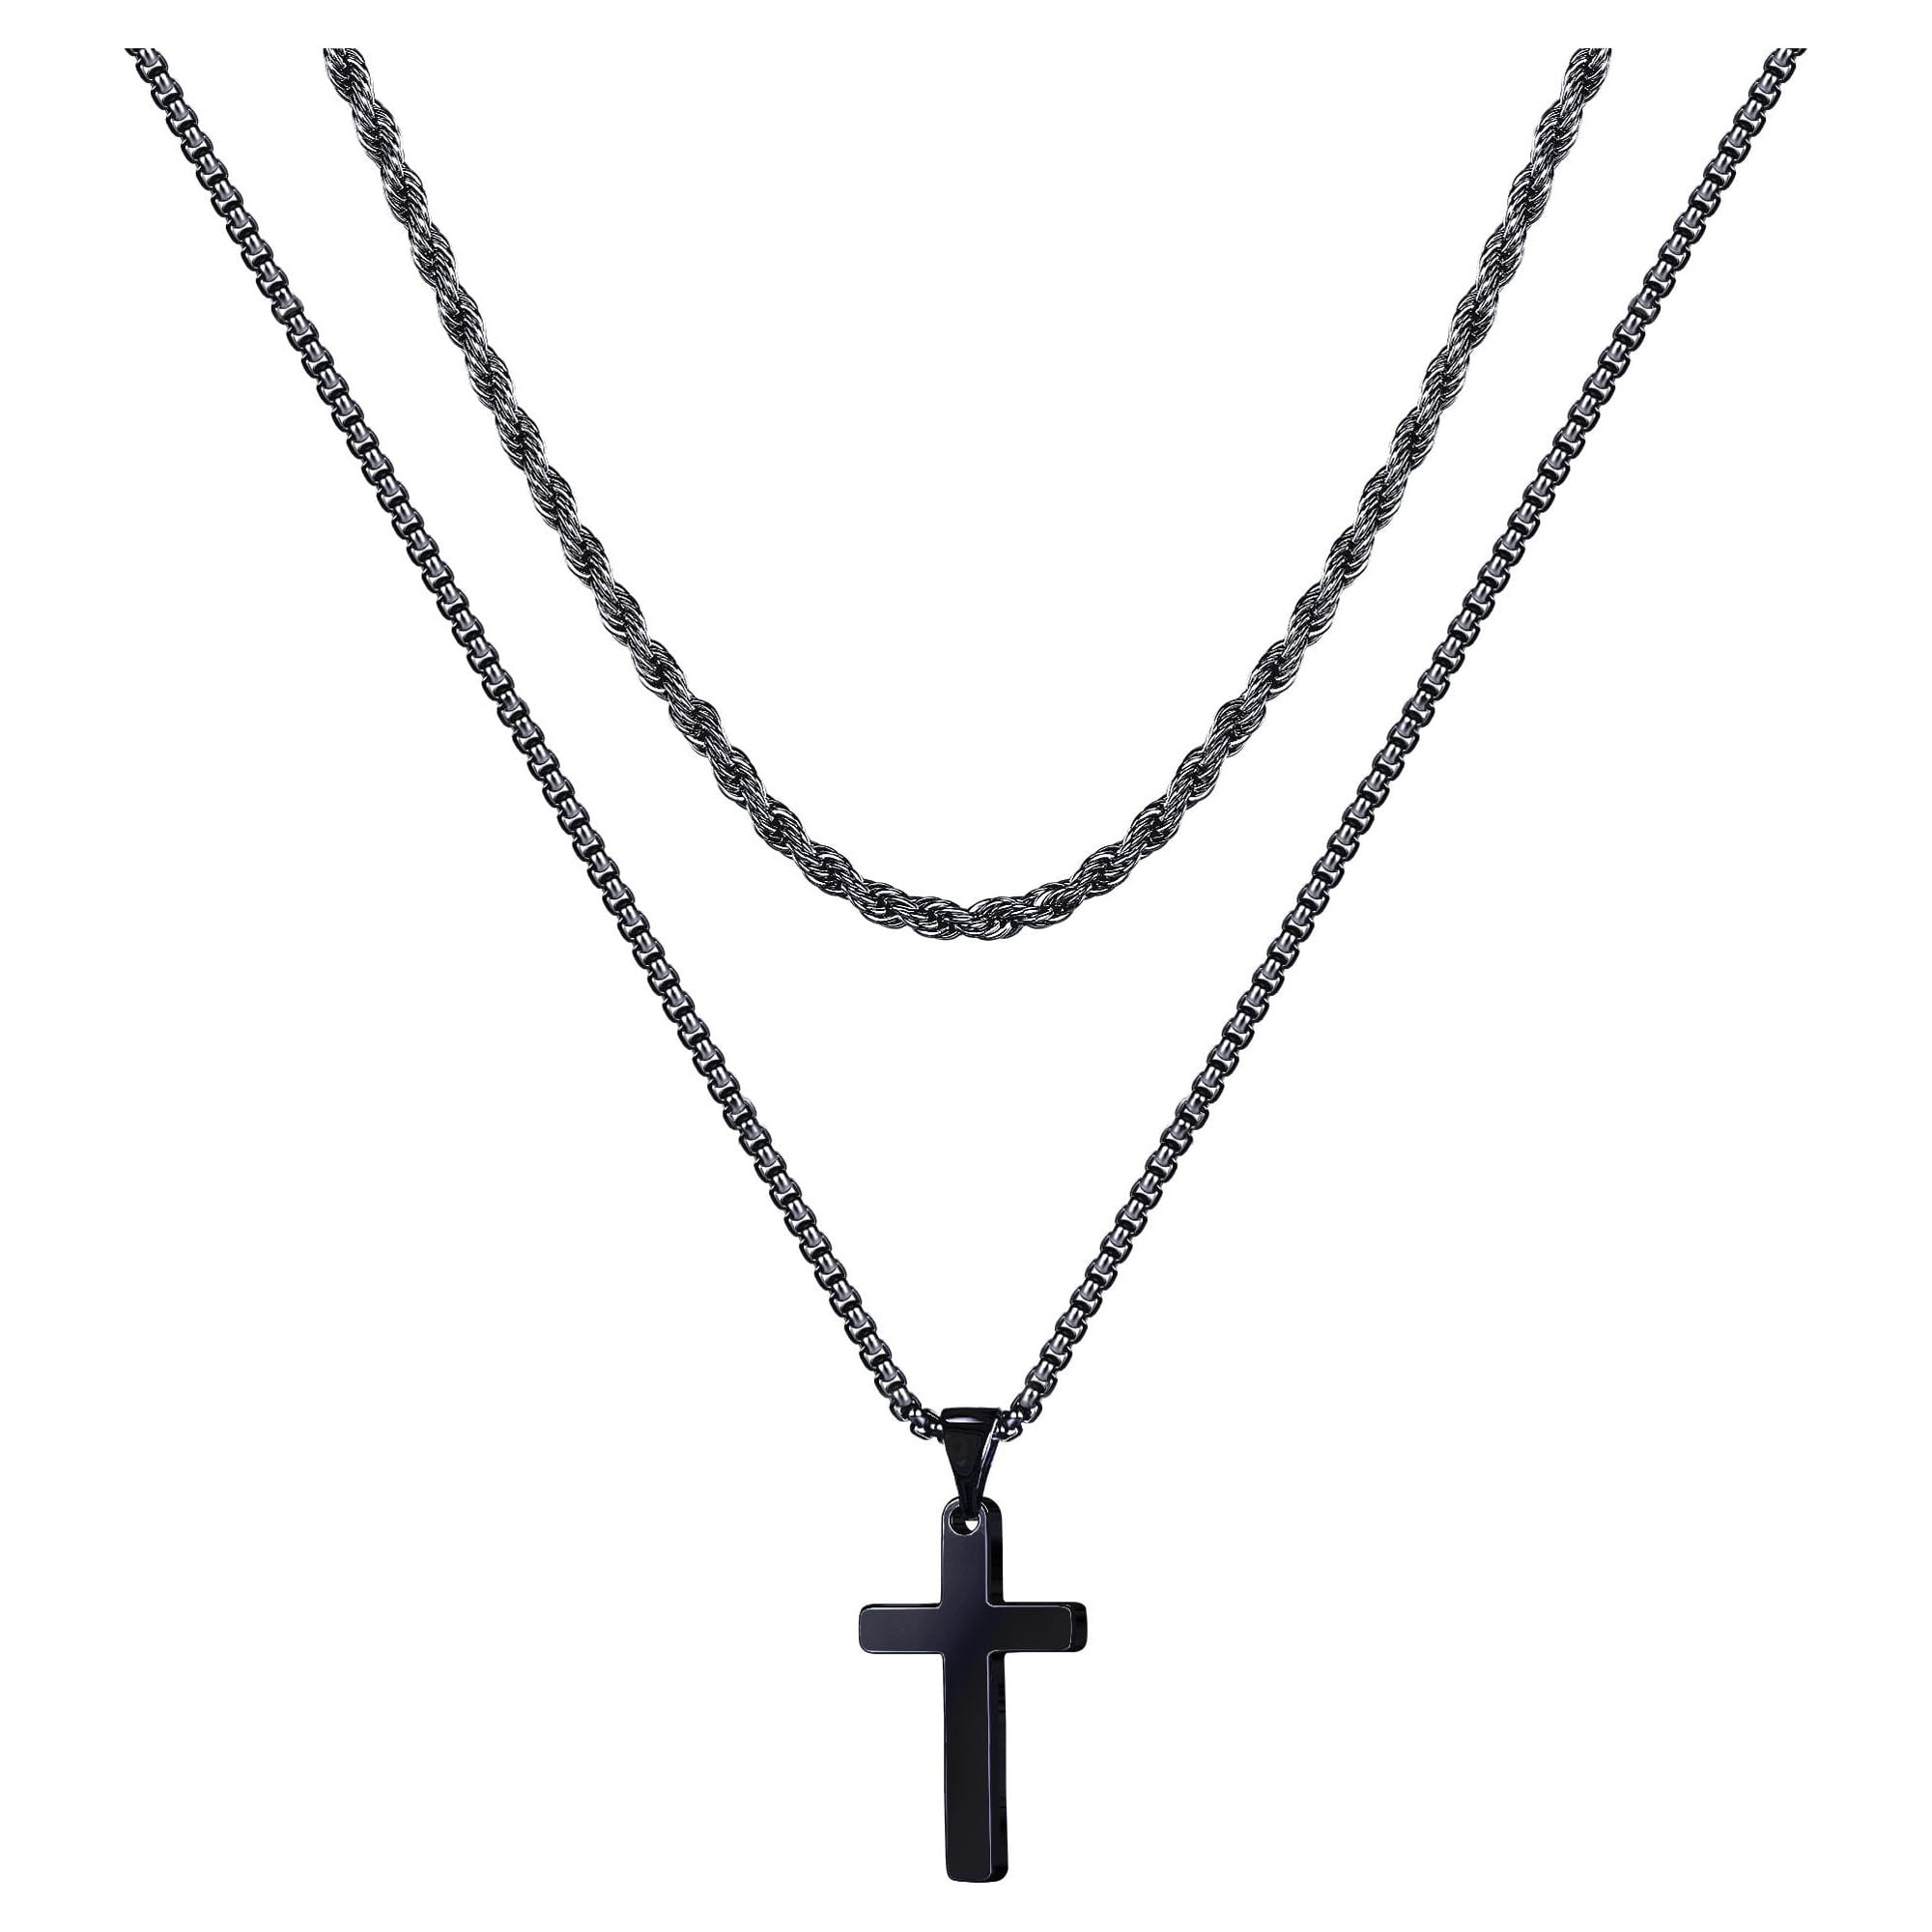 Tingn Cross Necklace for Men Boys Mens Stainless Steel Black Chain Cross Pendant Necklace, Men's, Size: One Size